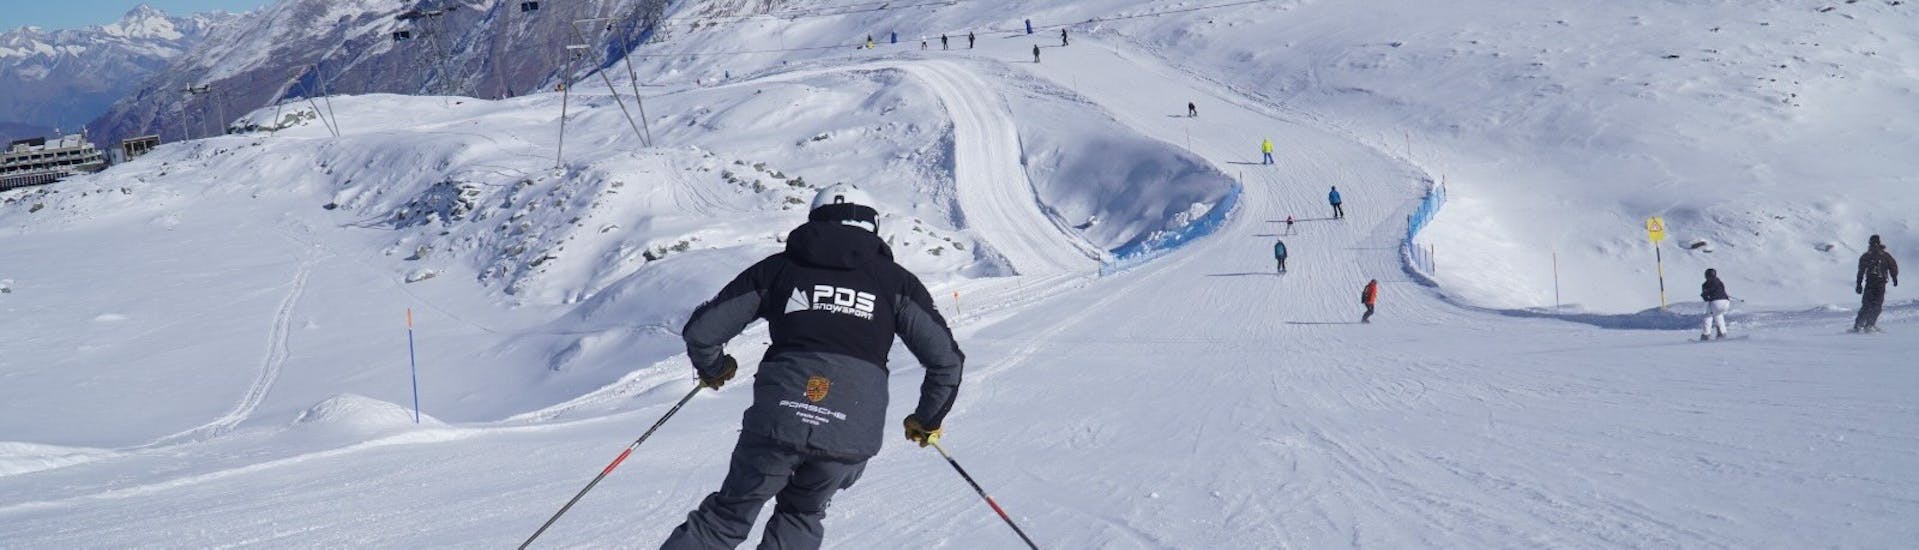 Private Ski Lessons for Adults of All Levels with Ski School PDS Snowsport - Hero image